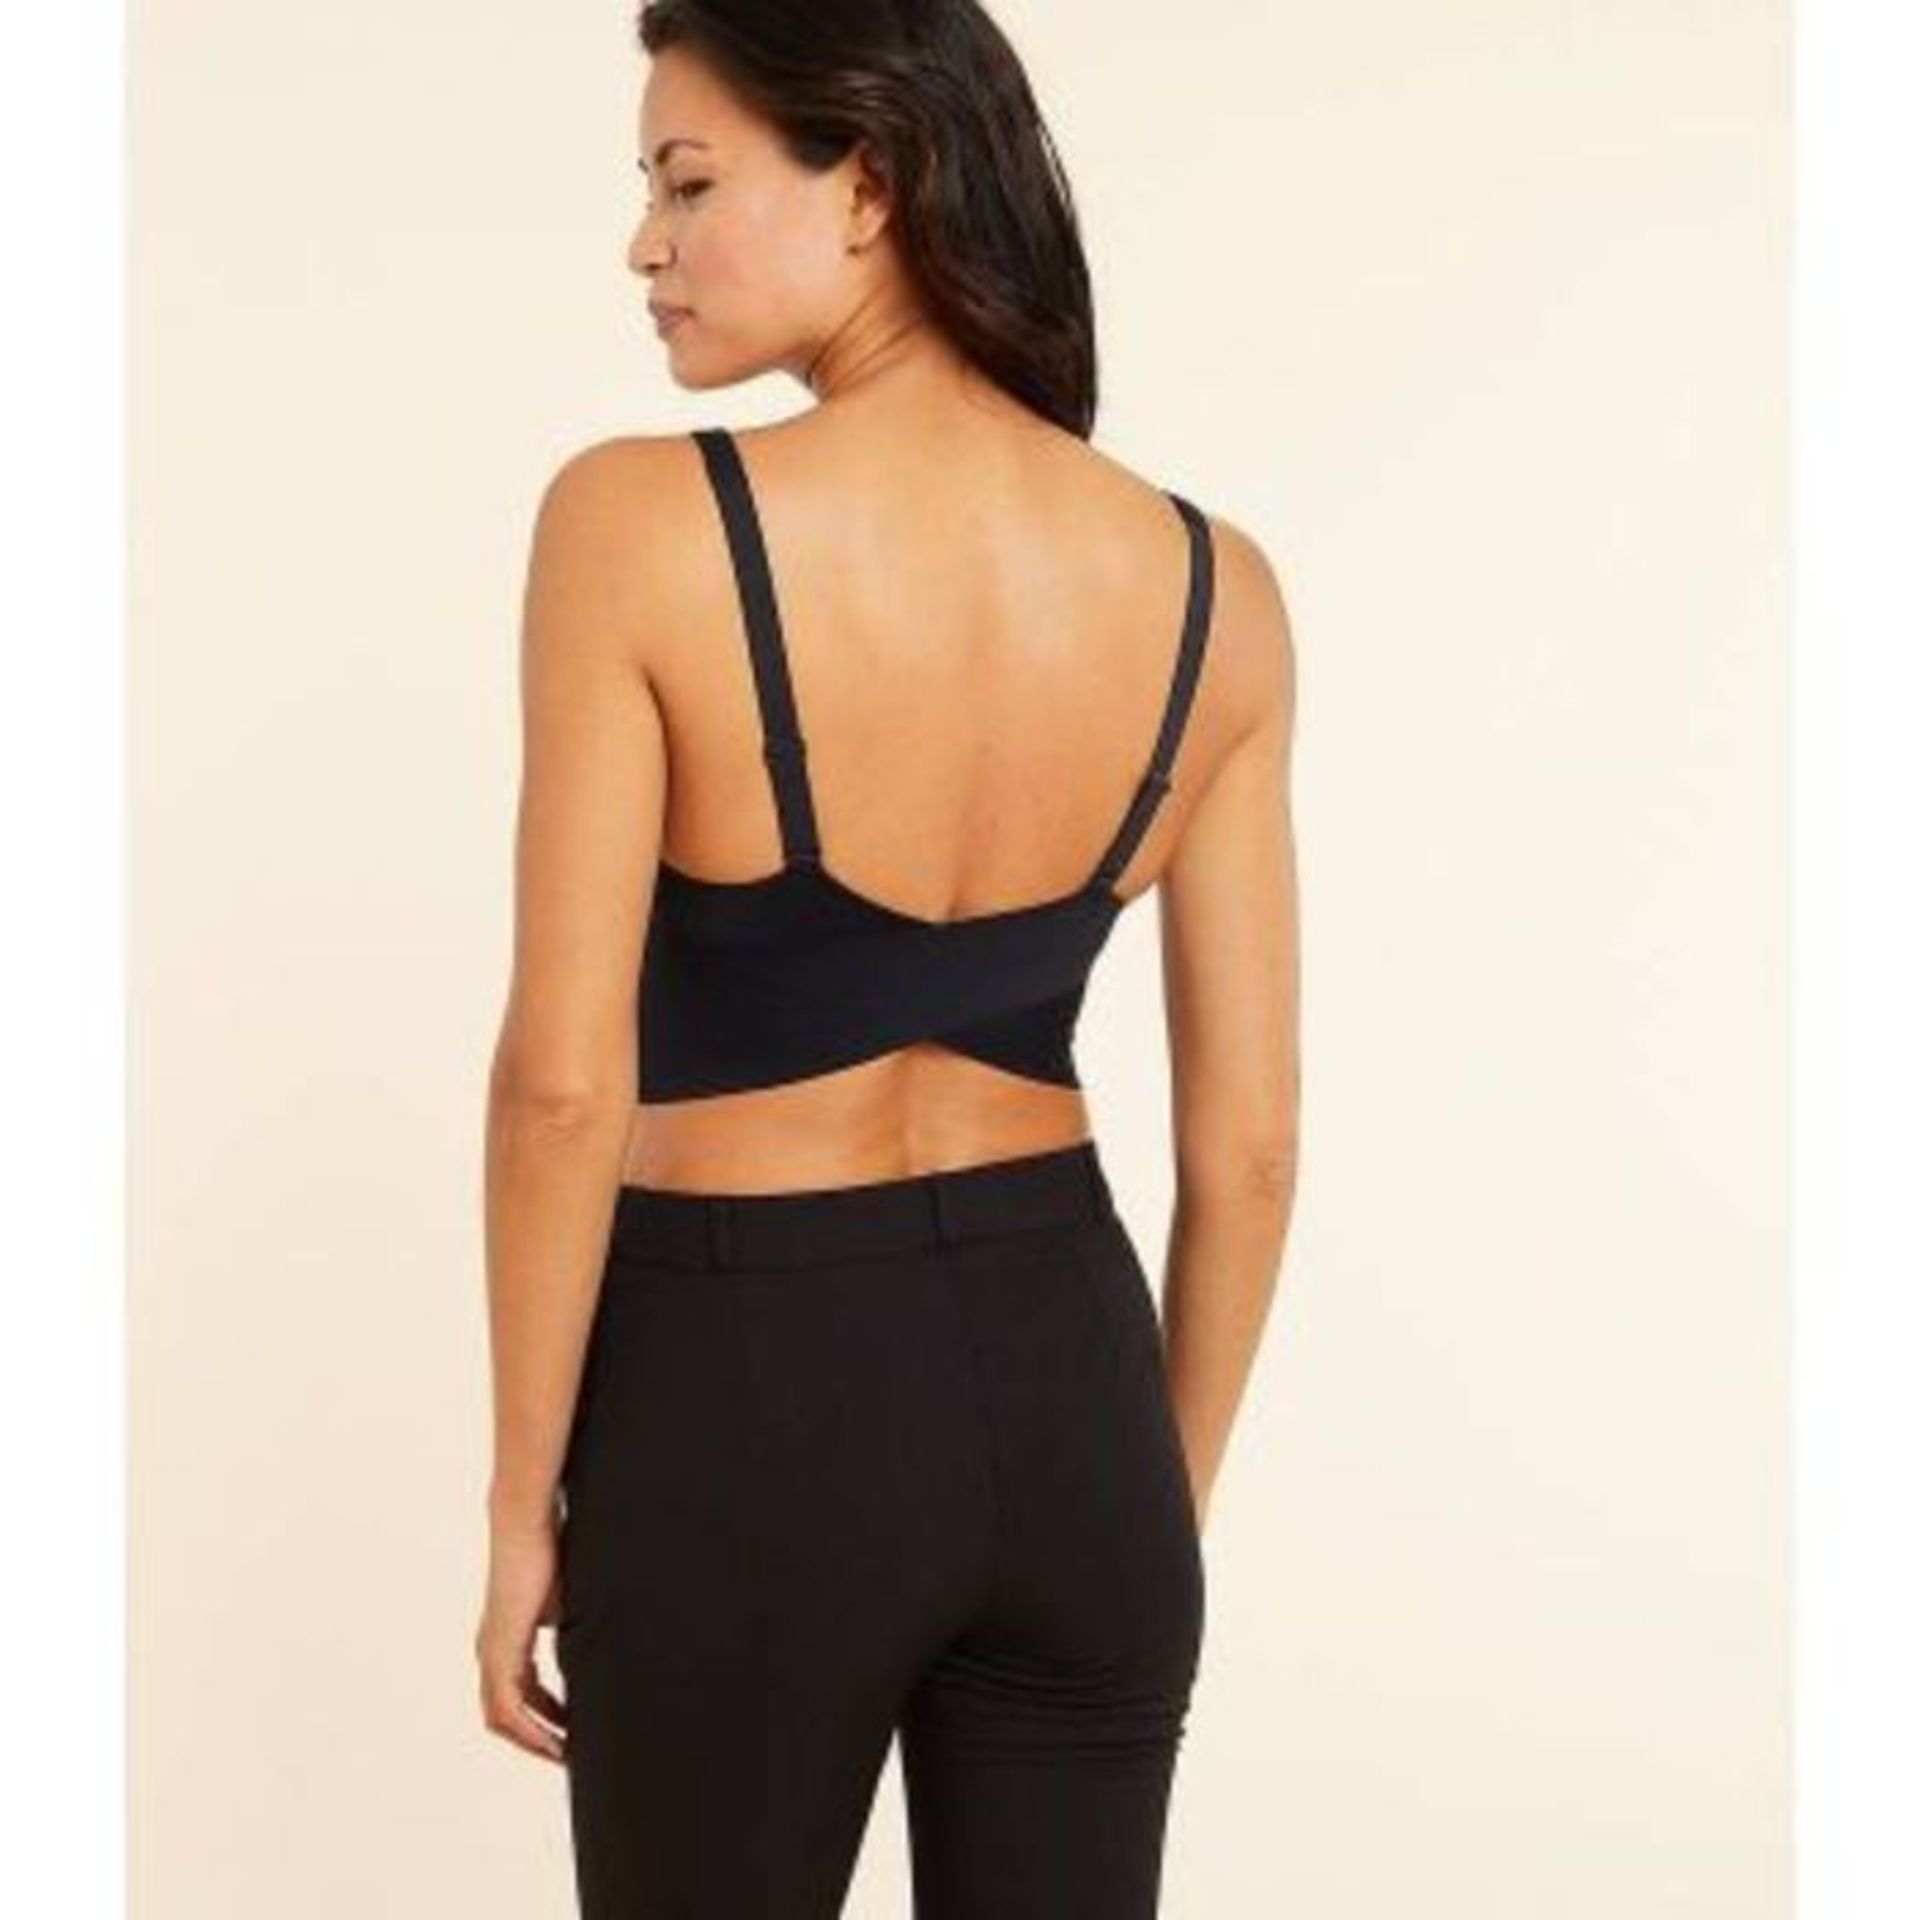 ETAM - 24 HOURS WRAPOVER BRALETTE WITHOUT UNDERWIRING - BLACK - SIZE: XS (UK 6). RRP £36.00 AS NEW - Image 2 of 3